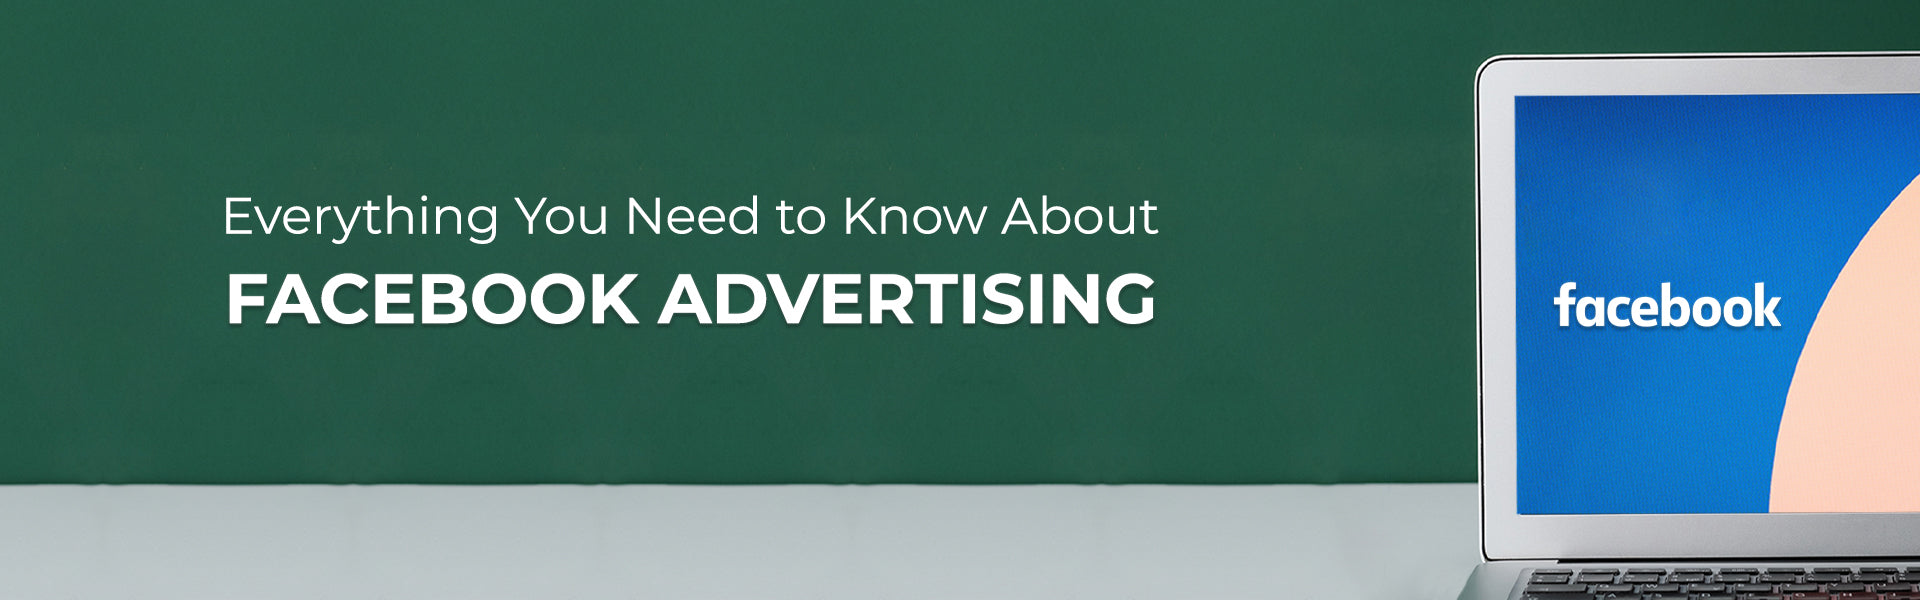 Everything You Need to Know About Facebook Advertising